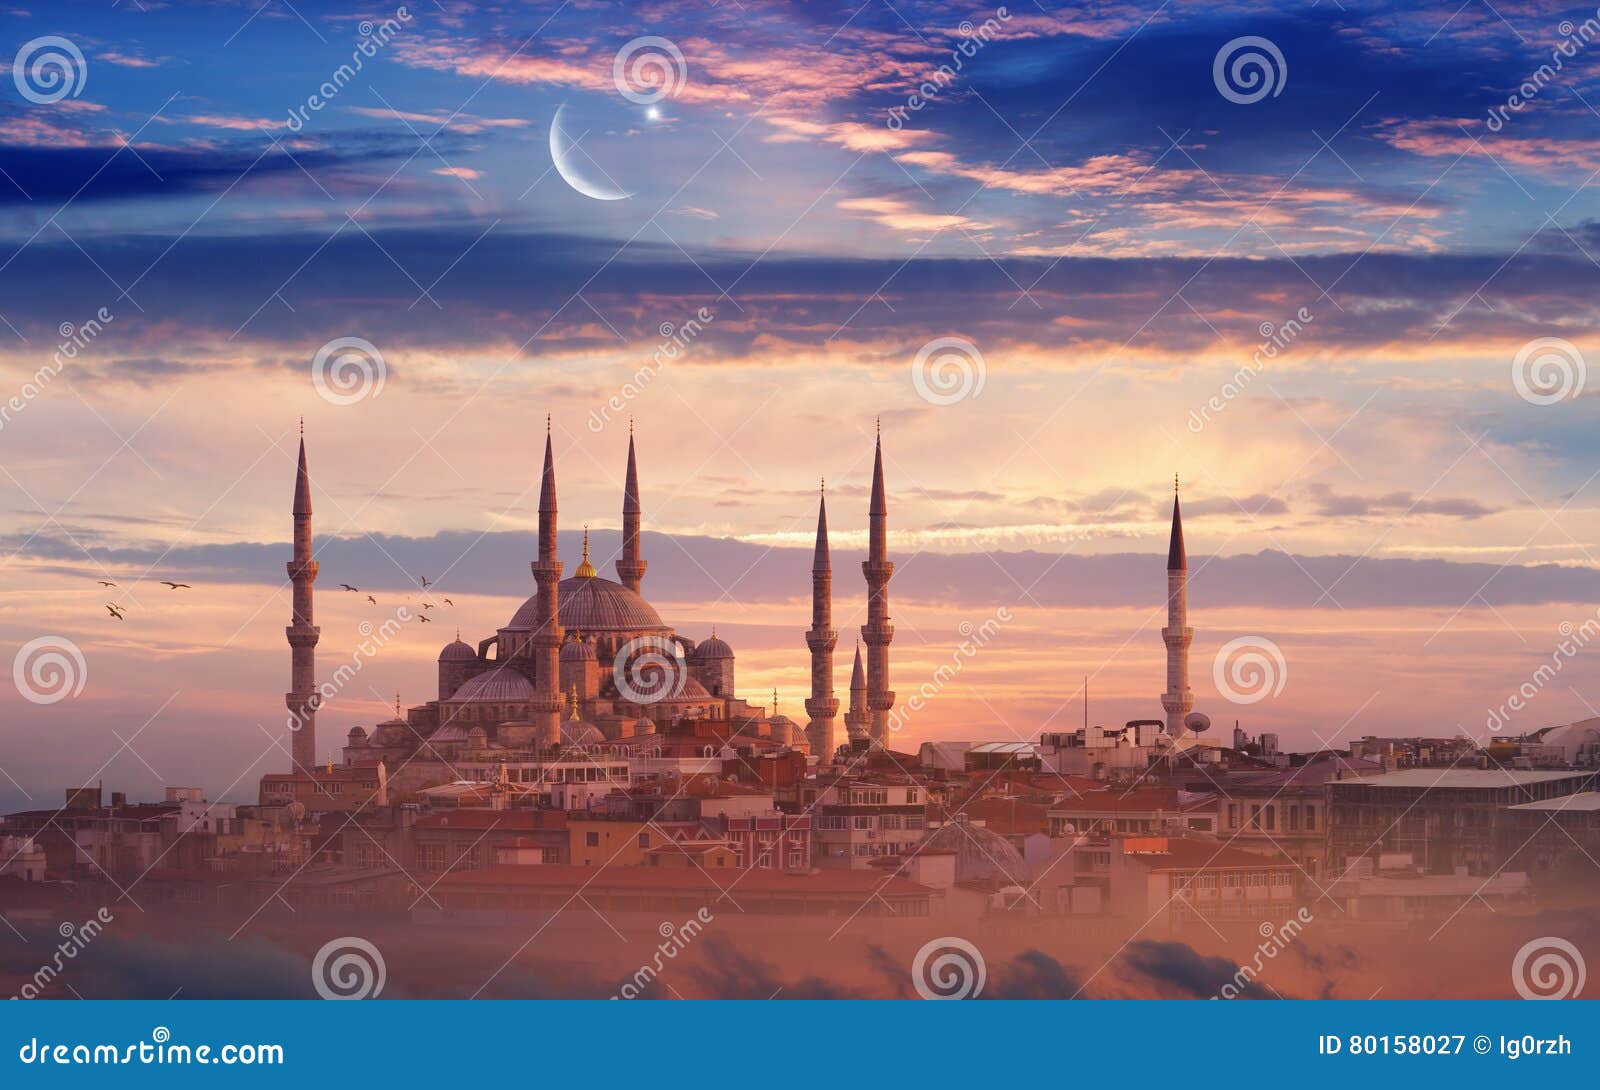 ramadan background with new moon, star and mosque